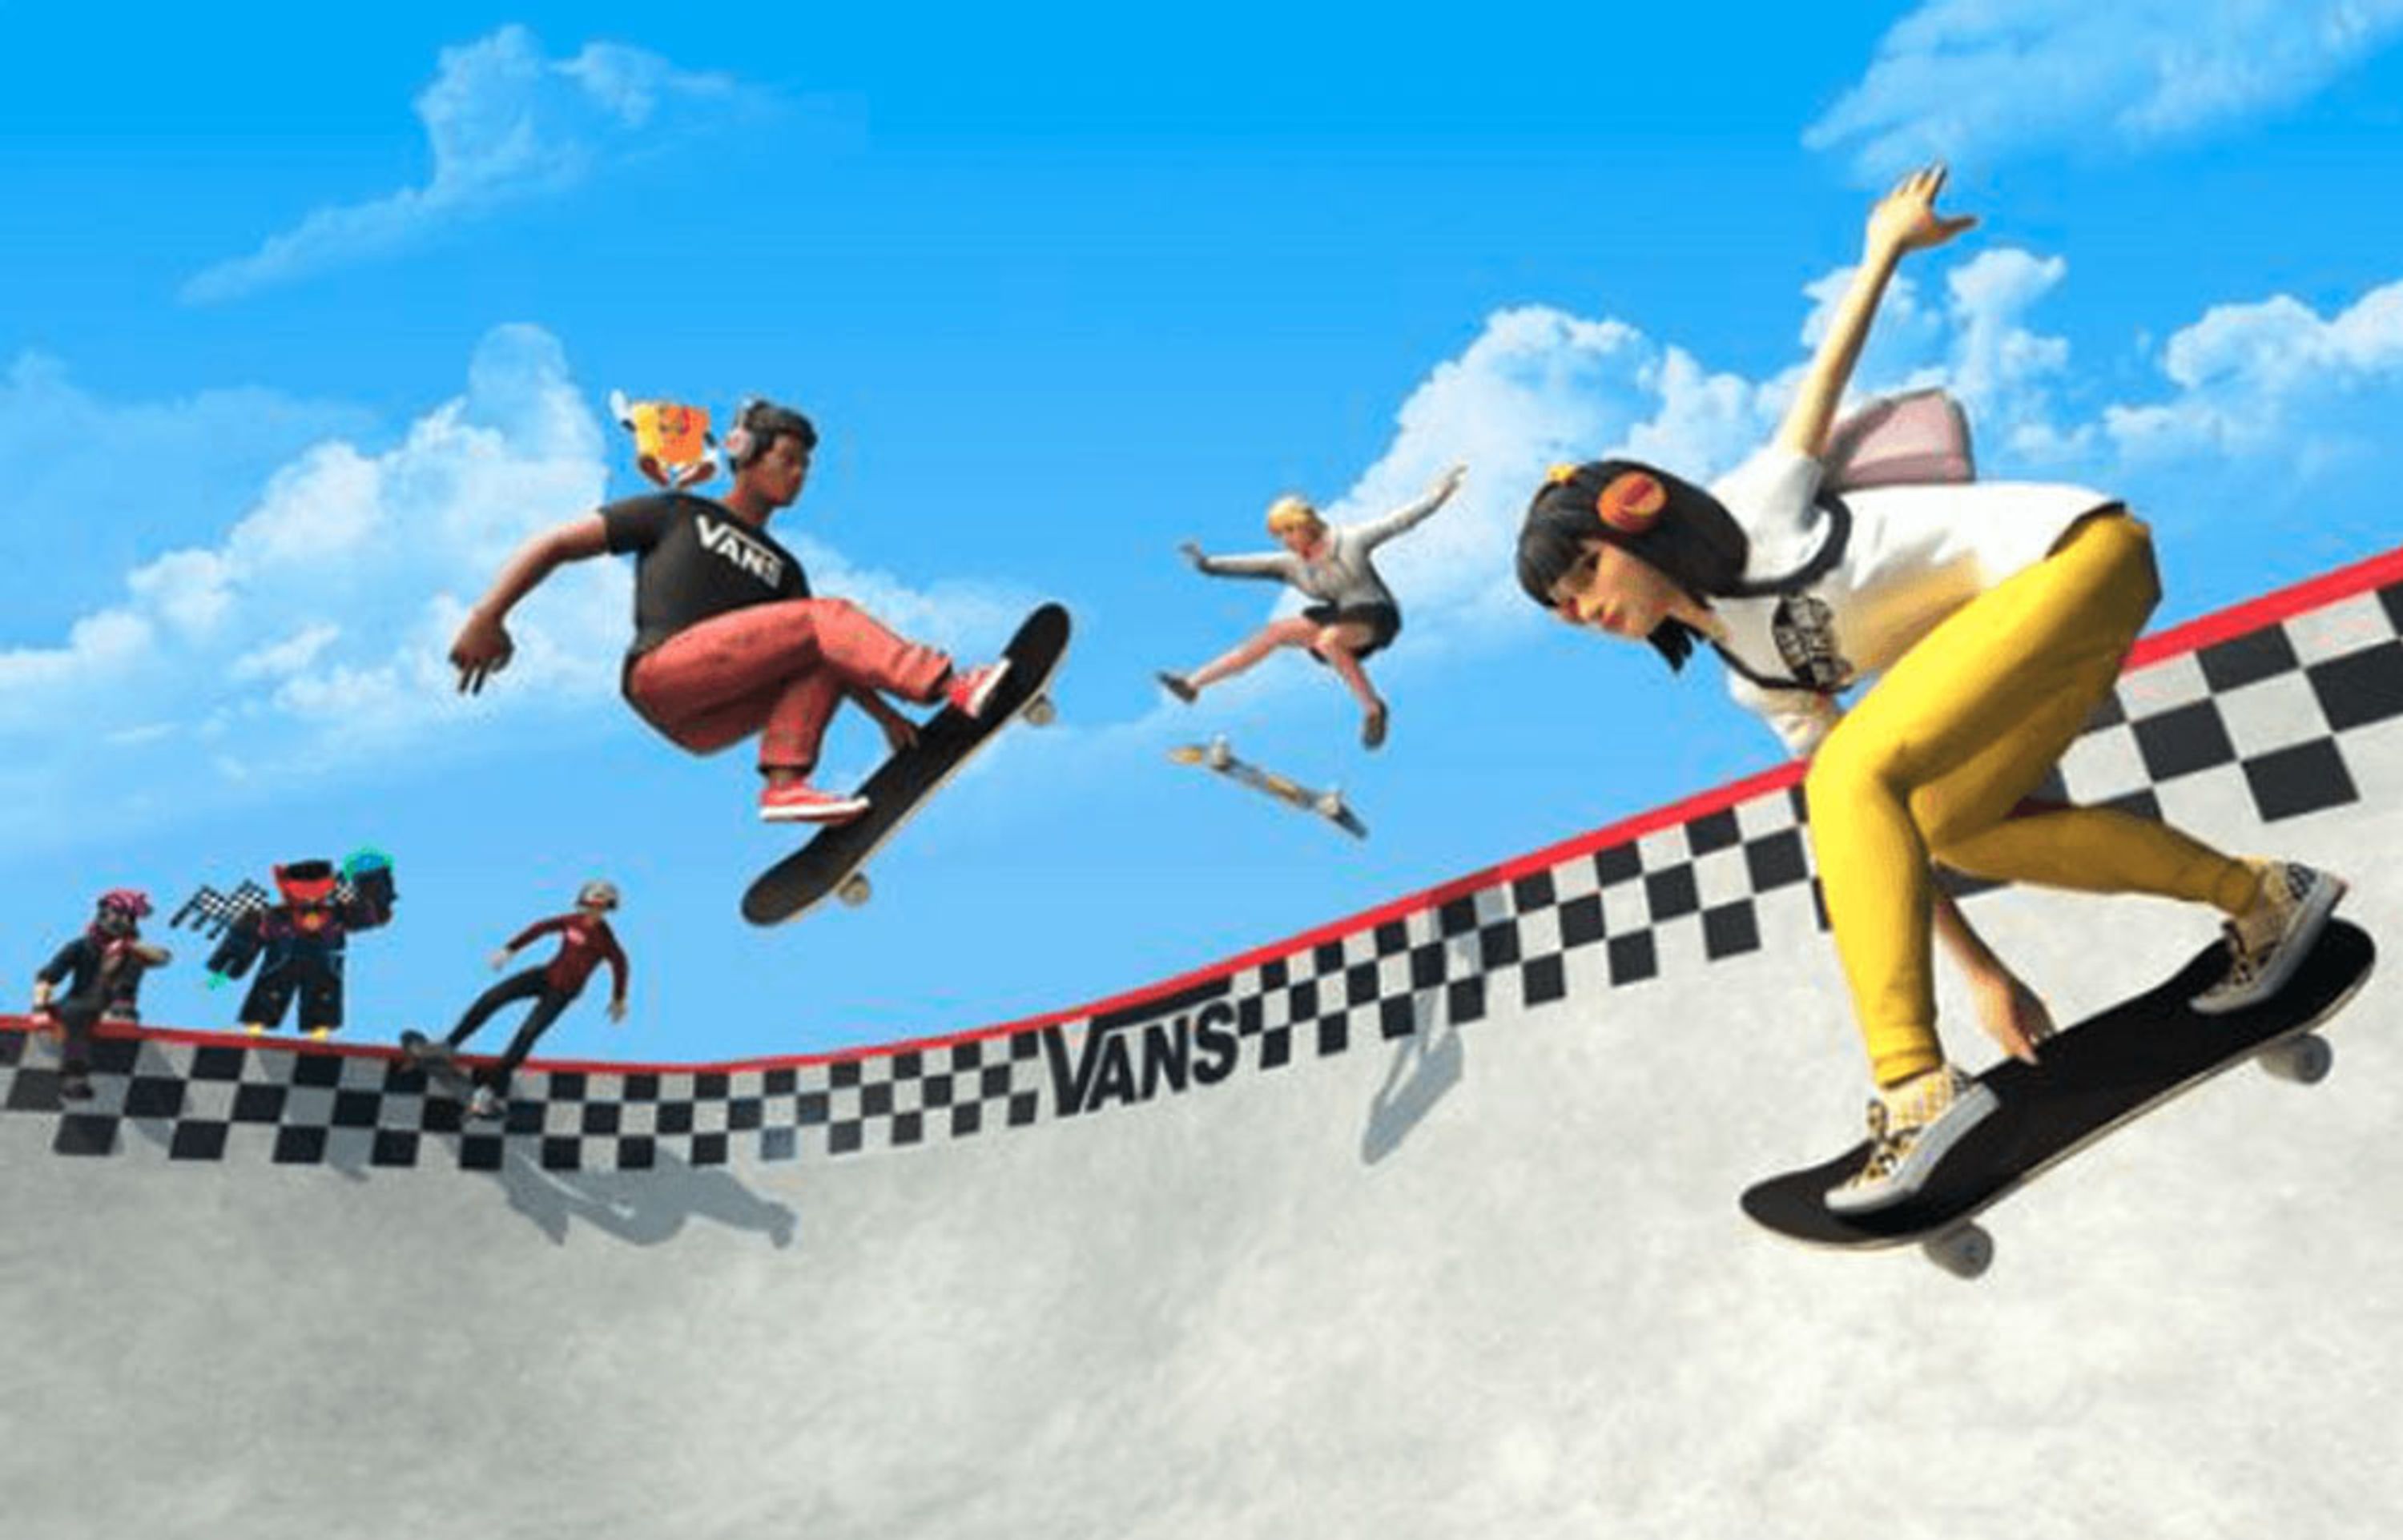 Image of a video game showing example of a metaverse where skateboarders are customized with their own gear and currency.